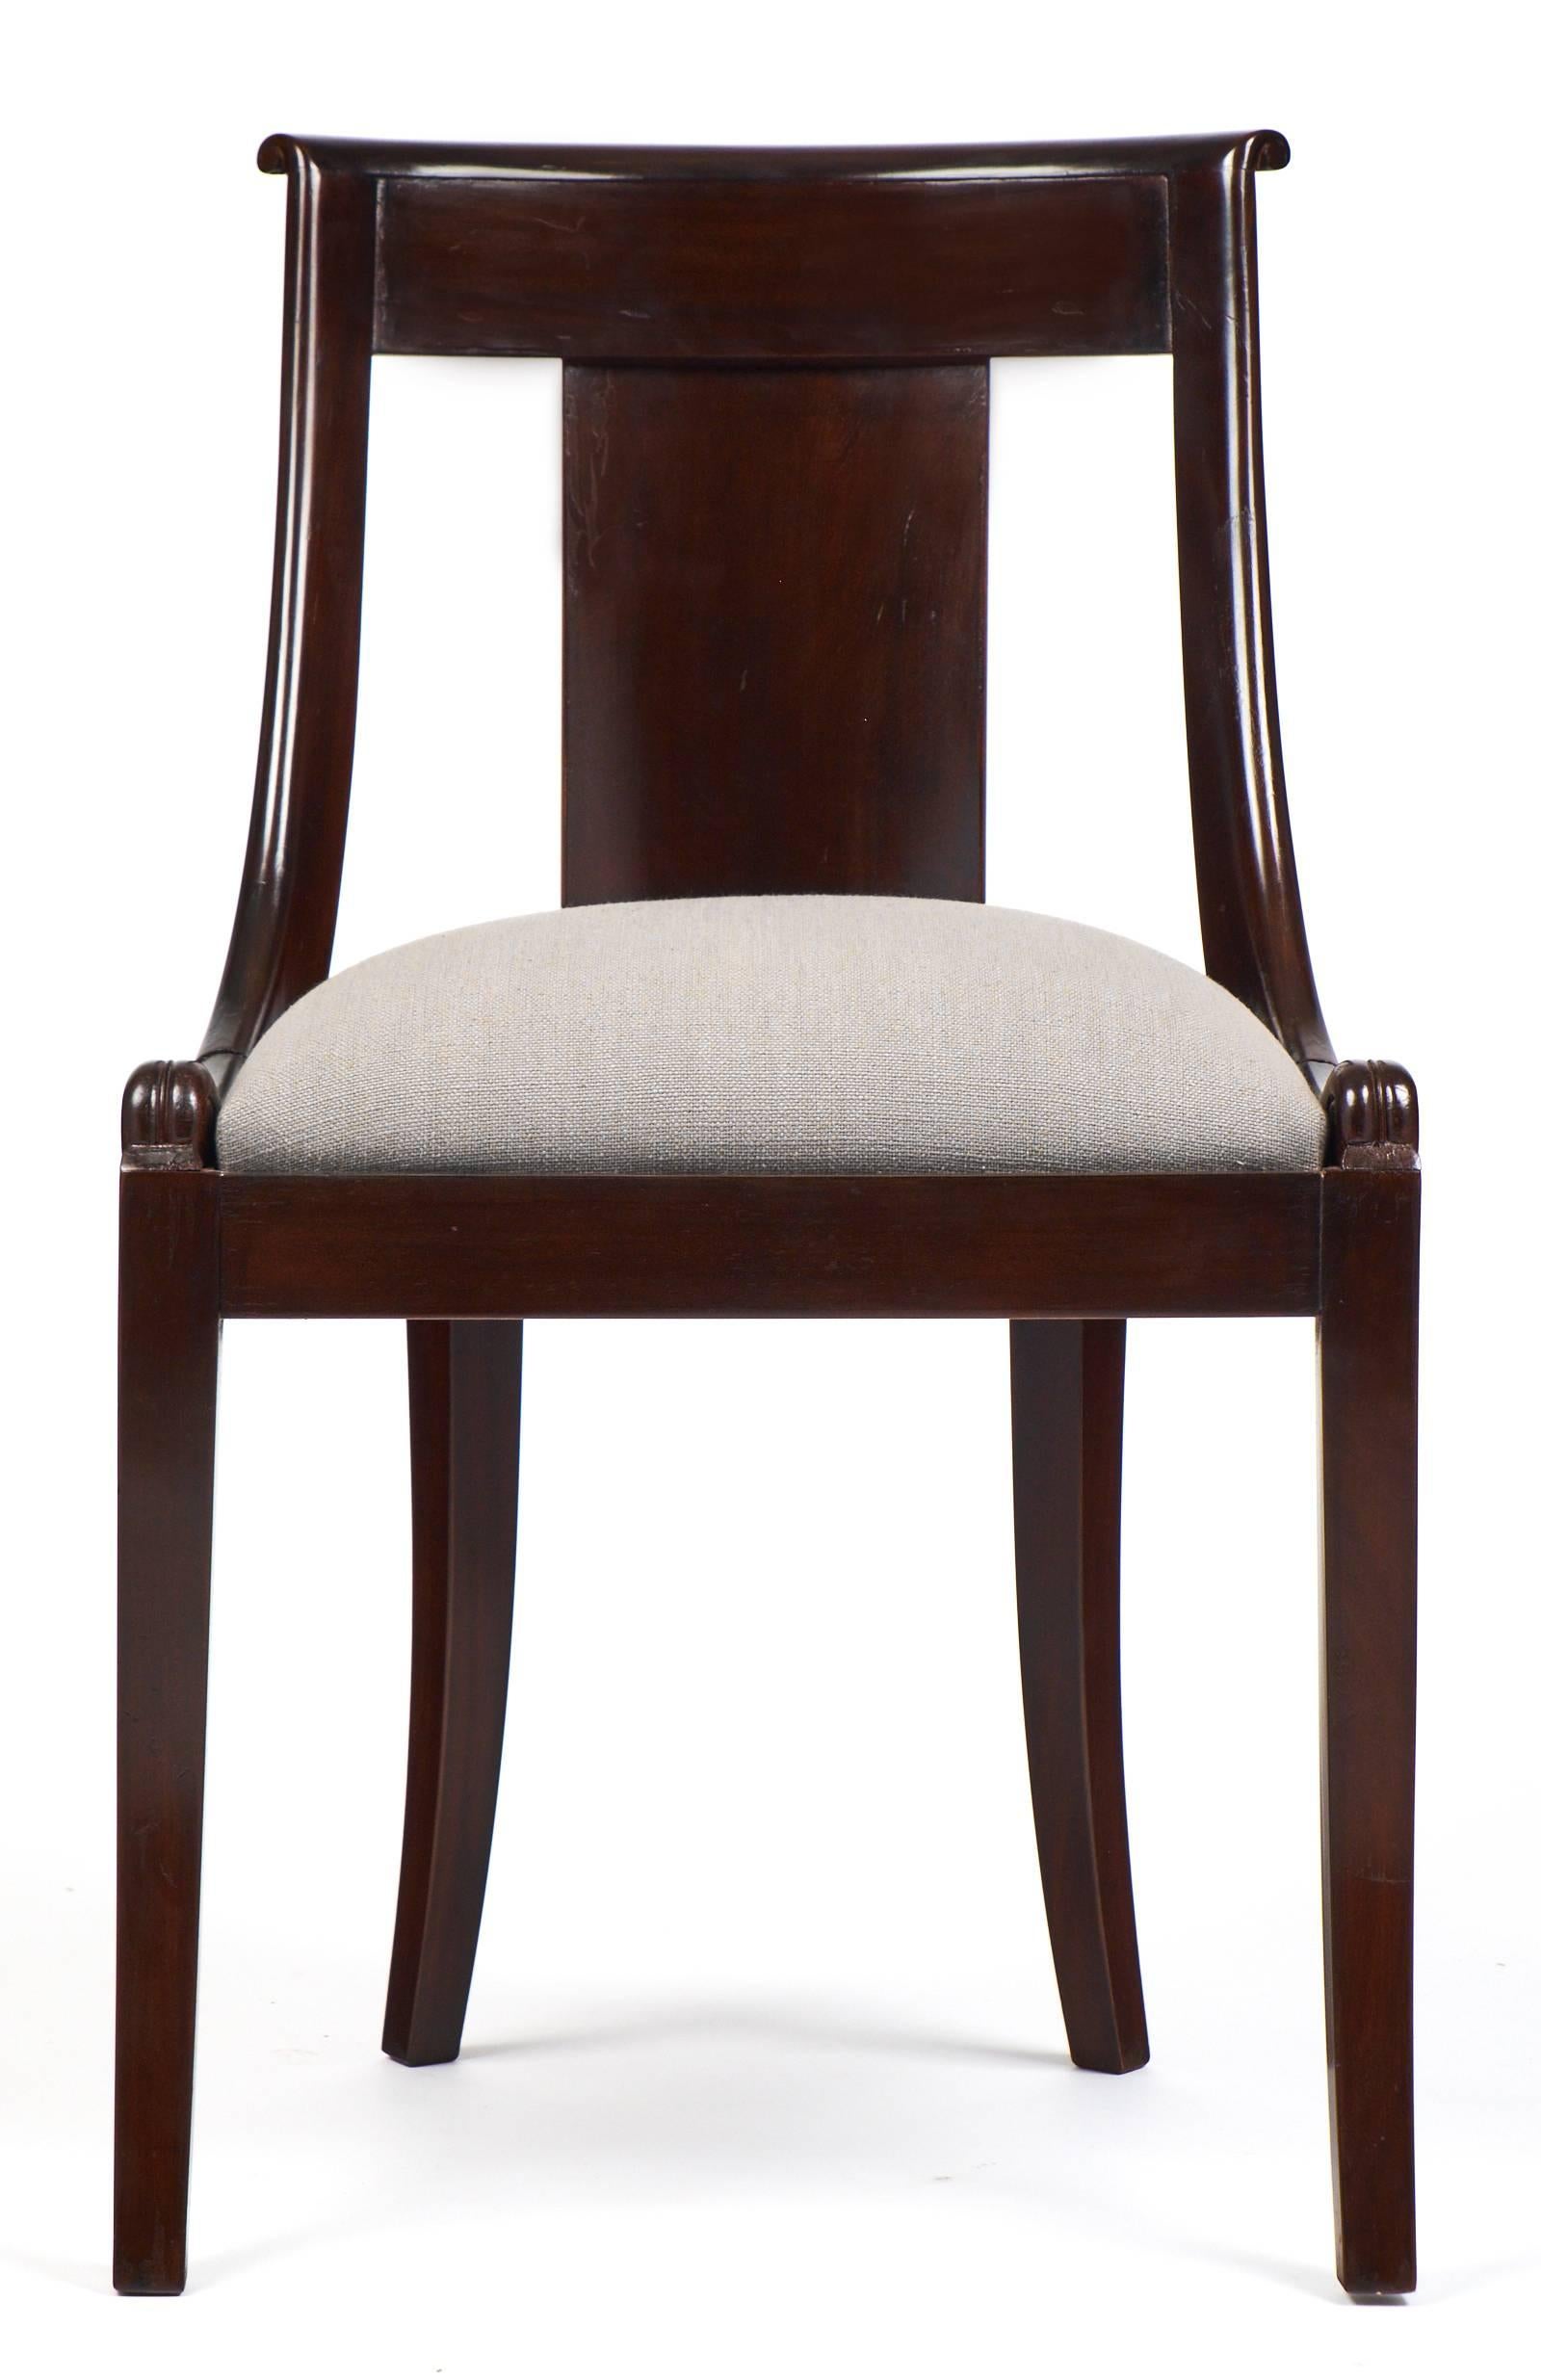 French antique set of ten Empire style gondola chairs of solid mahogany with a lustrous French polish finish. Beautifully carved with a comfortable, curving back. Professionally reupholstered in a gray linen blend. Graceful lines with sturdy